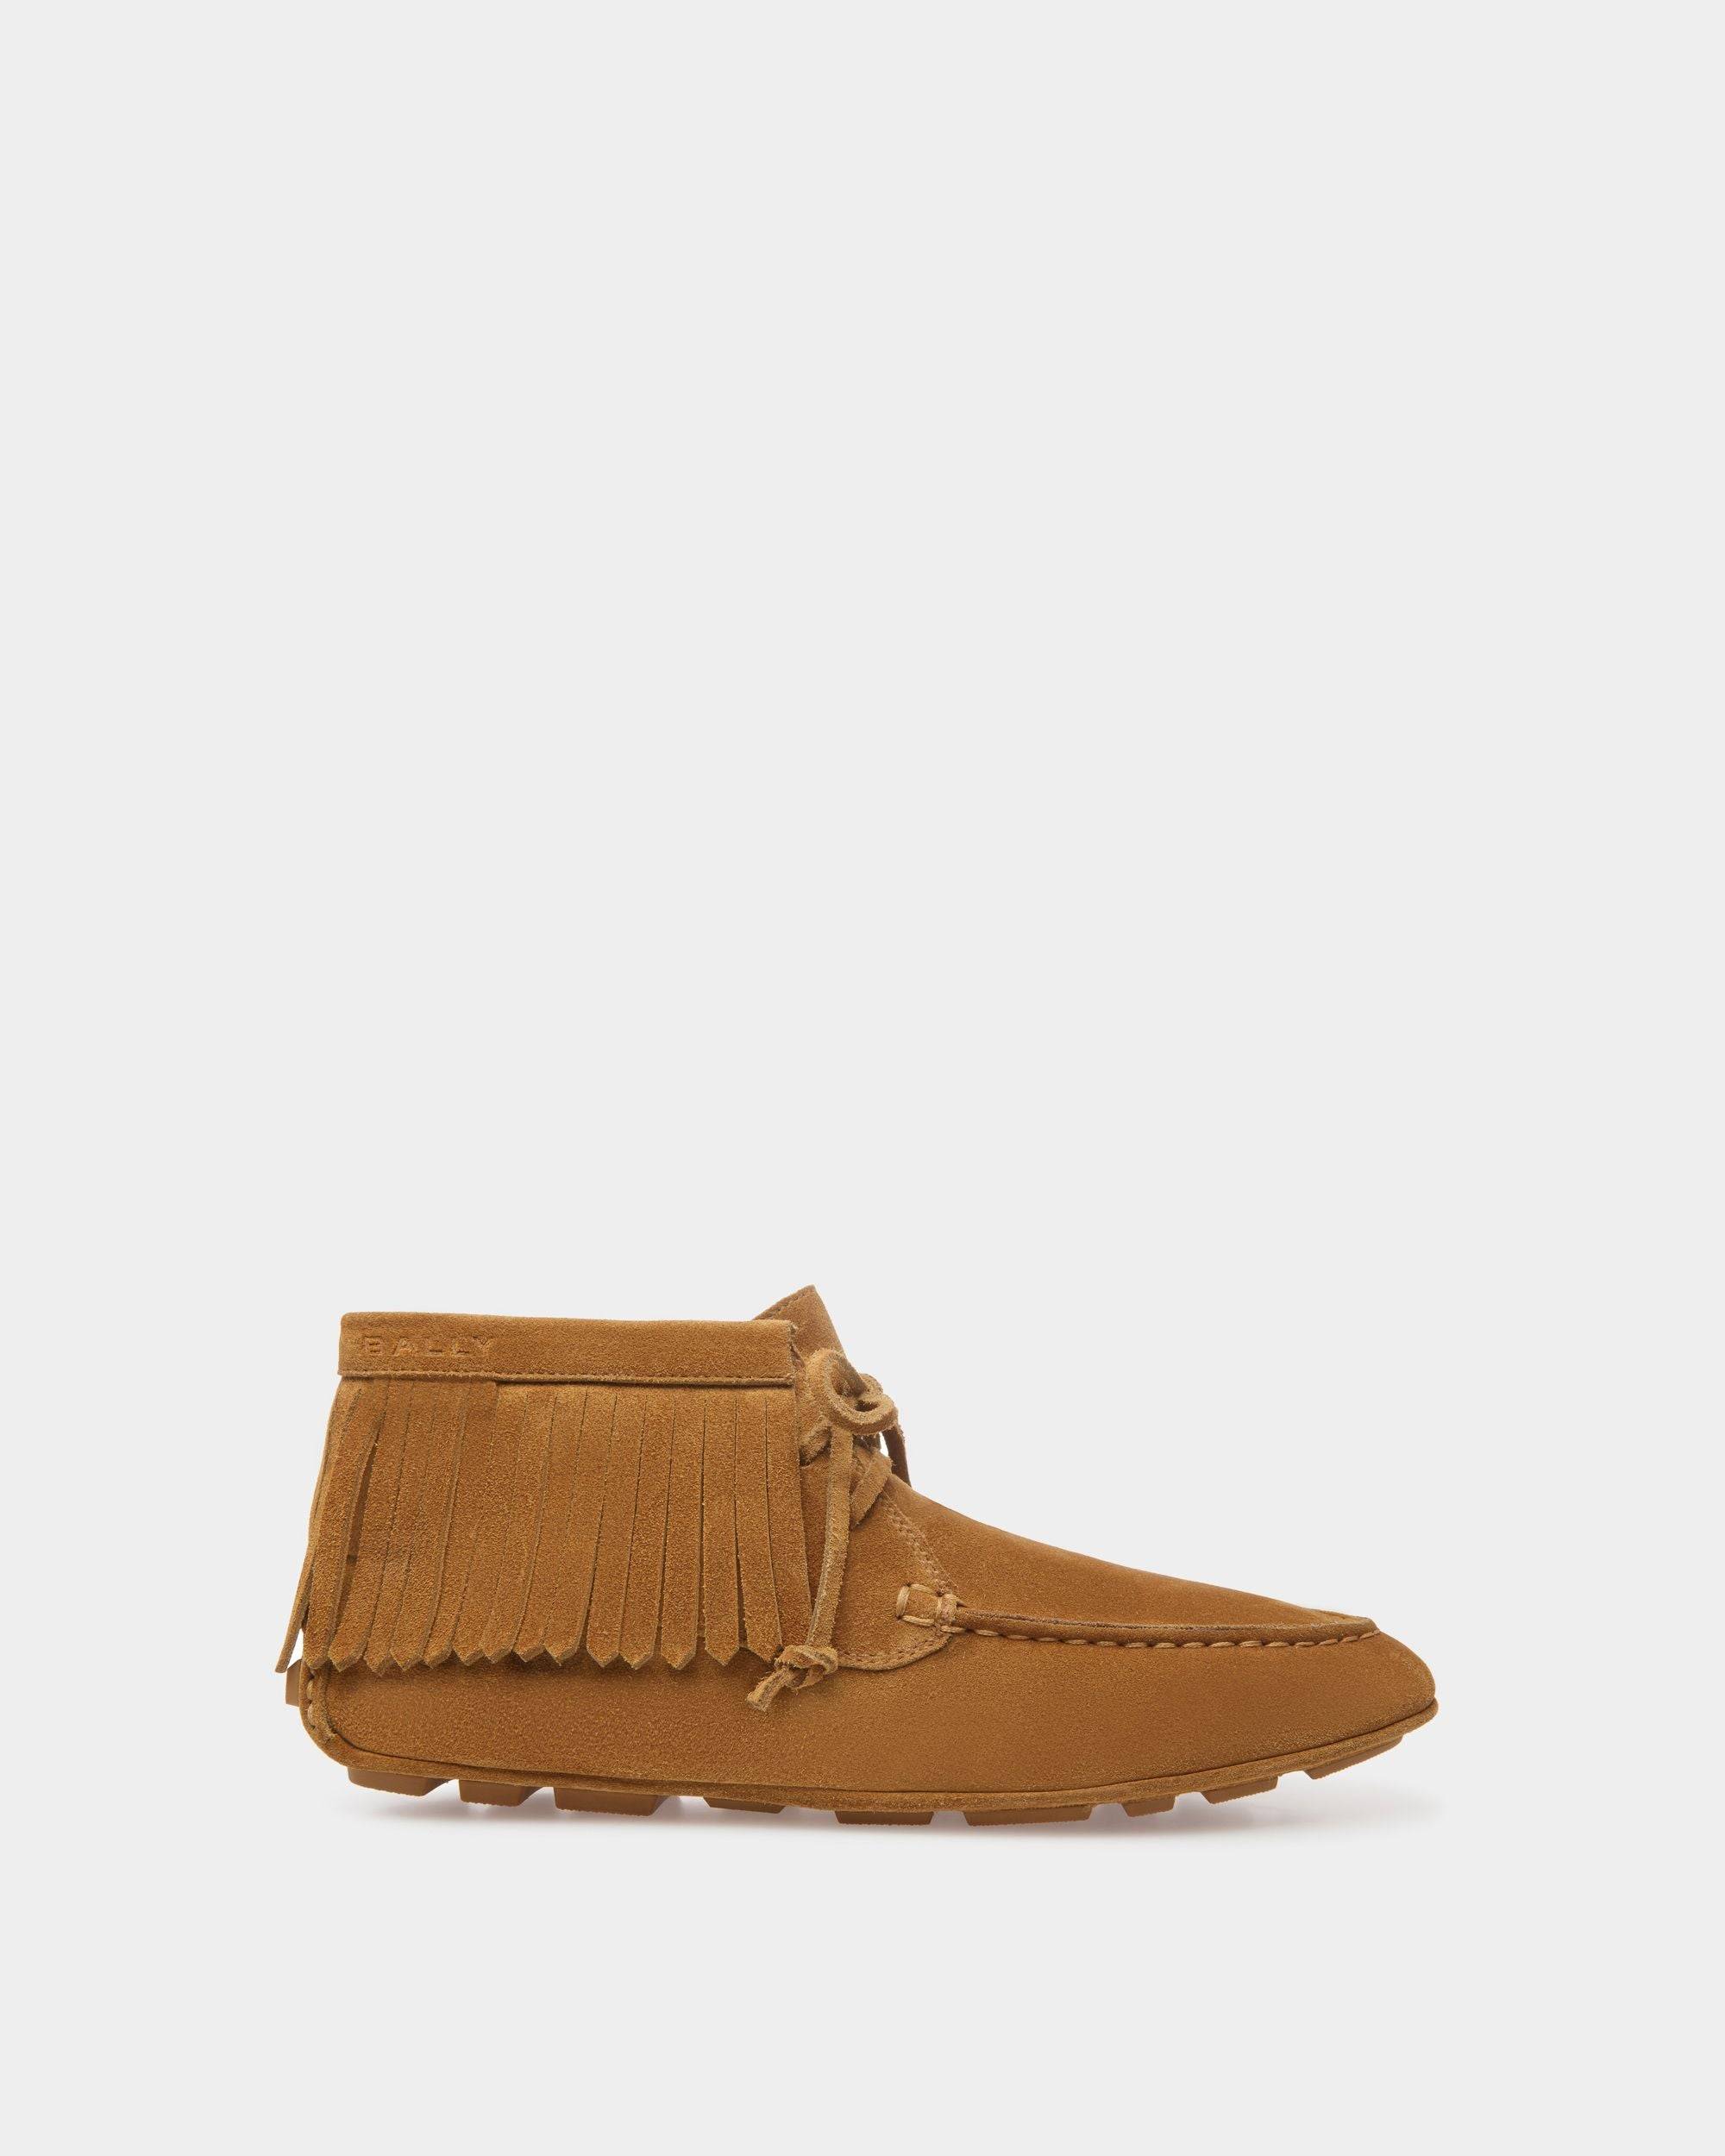 Women's Kerbs Driver Shoes In Desert Leather | Bally | Still Life Side